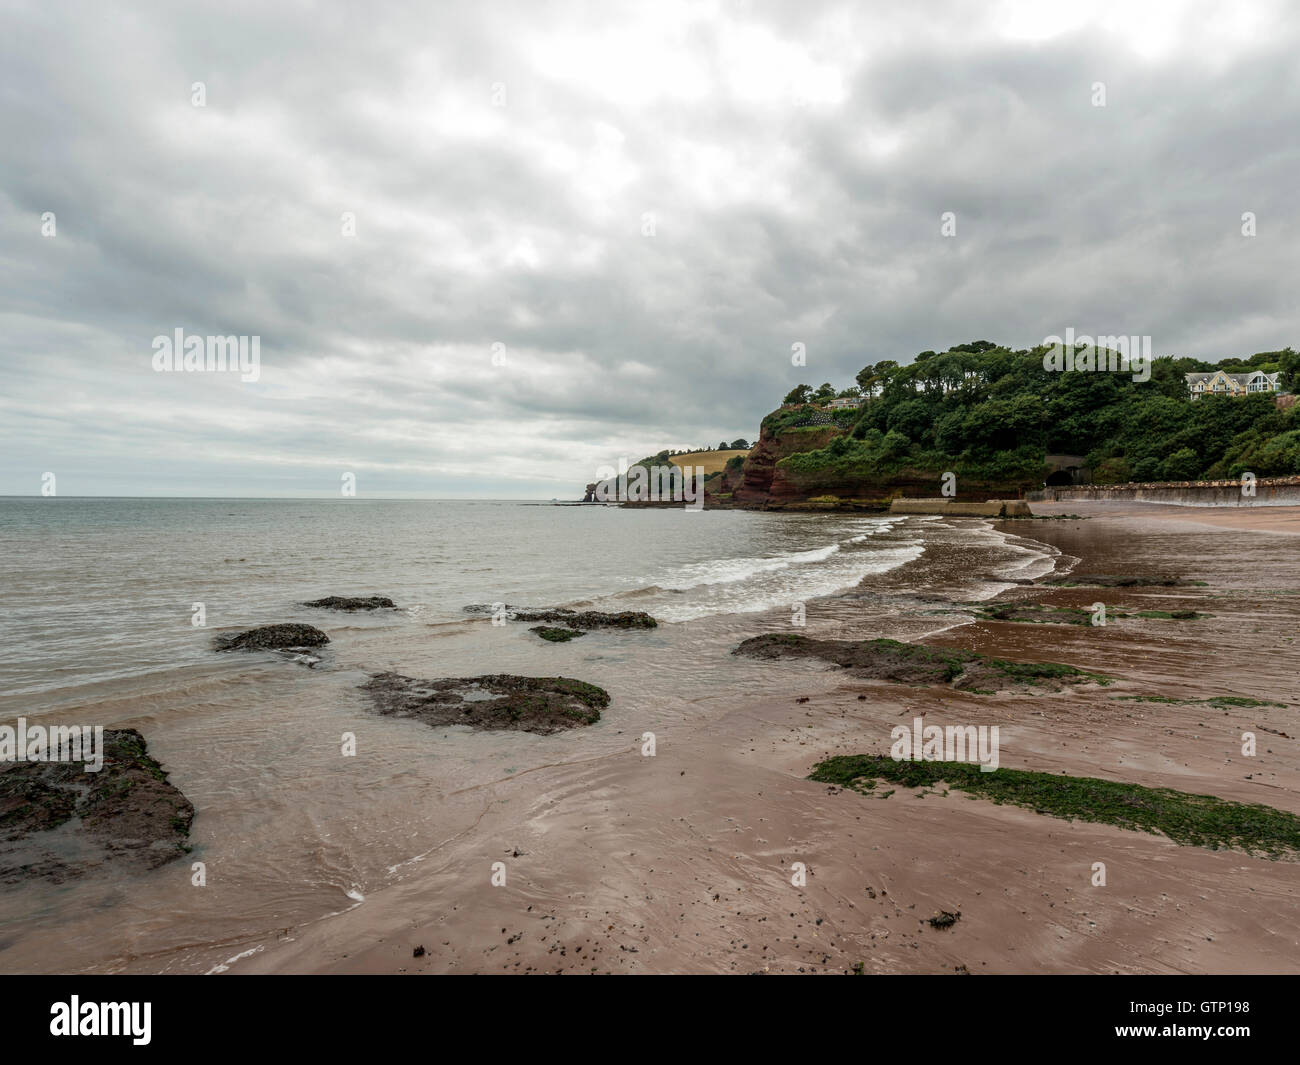 Beautiful landscape depicting storm clouds casting shadows over the South West Coastal Path / beach at Dawlish, Devon. Stock Photo